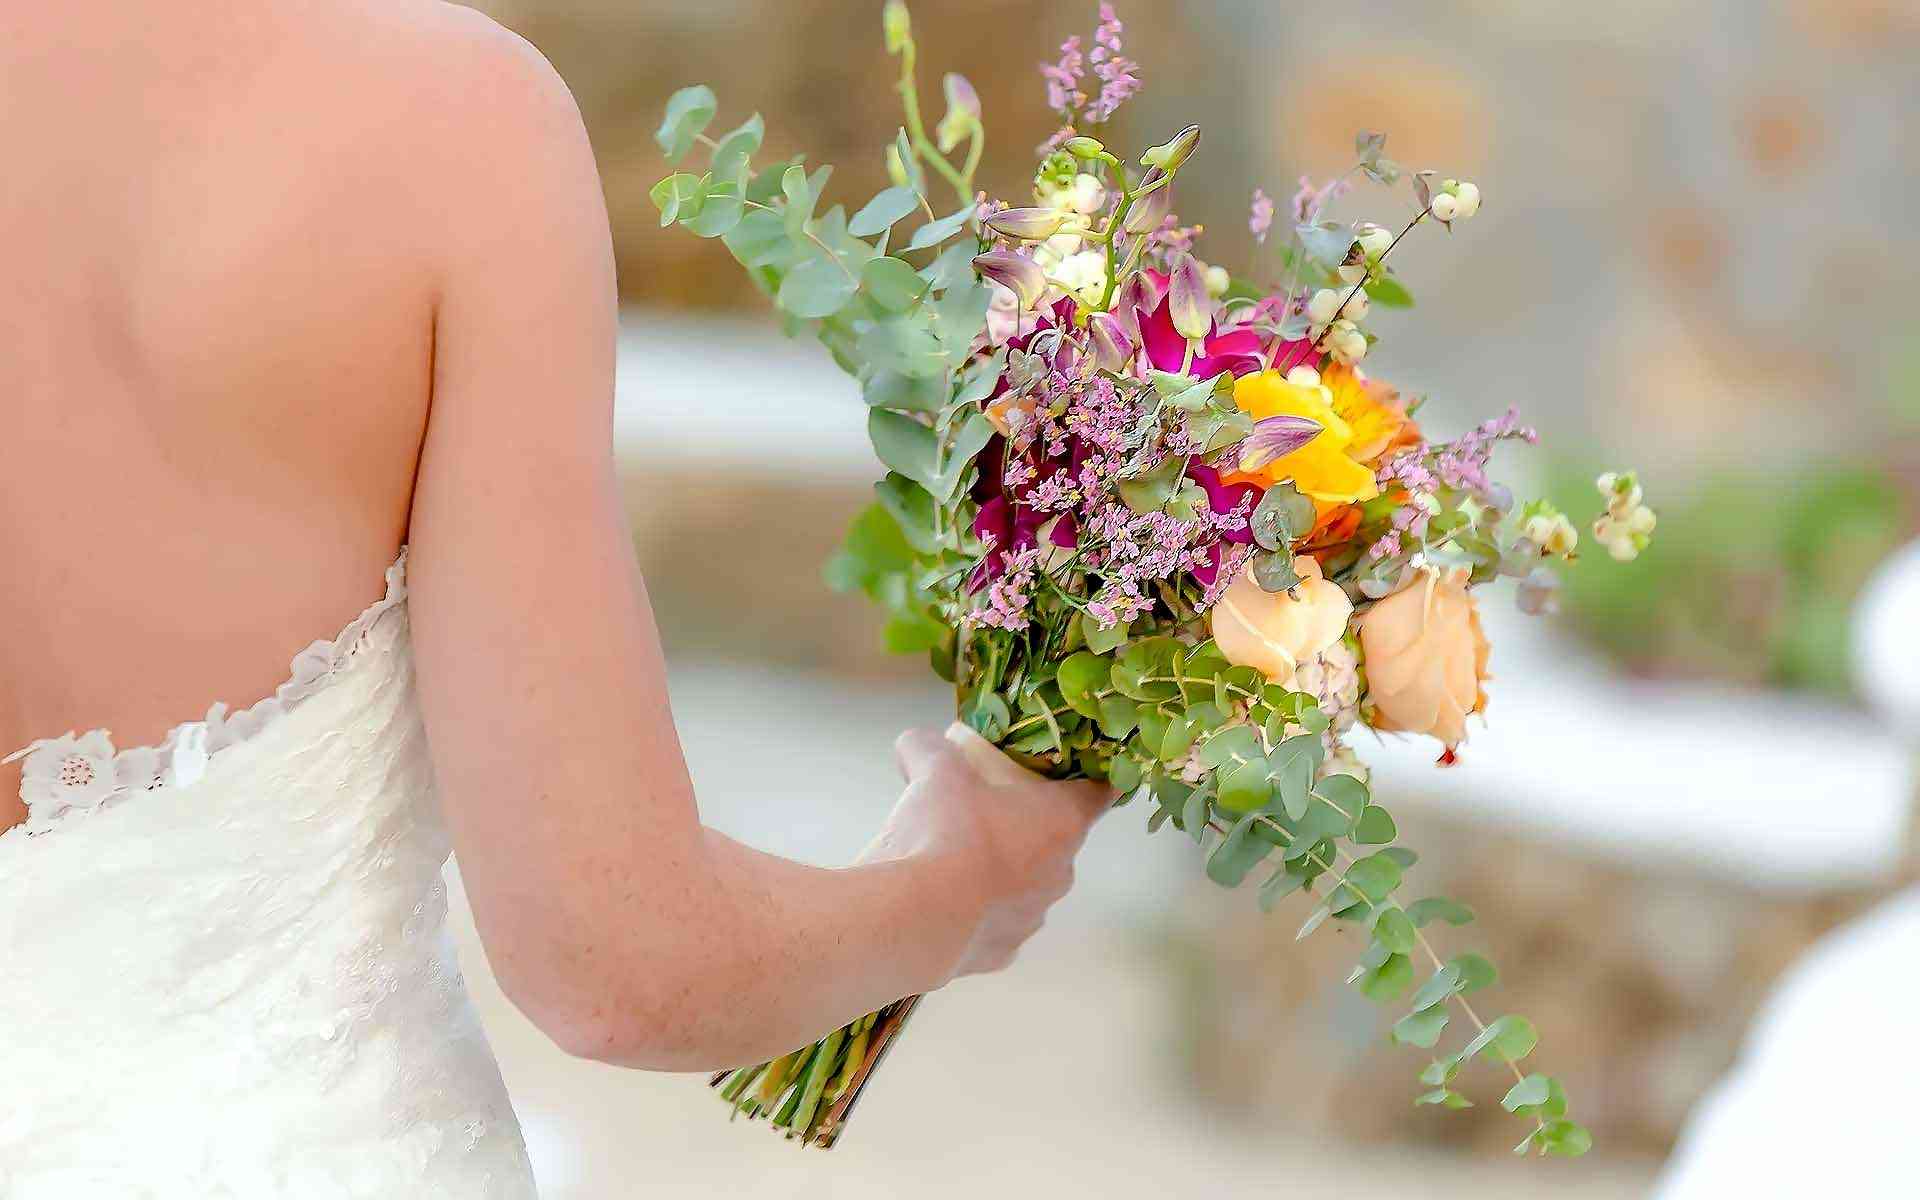 A-Bohemian-Wedding-Bouquet-Is-Full-Of-Whimsical-Details-And-Wild-Flowers